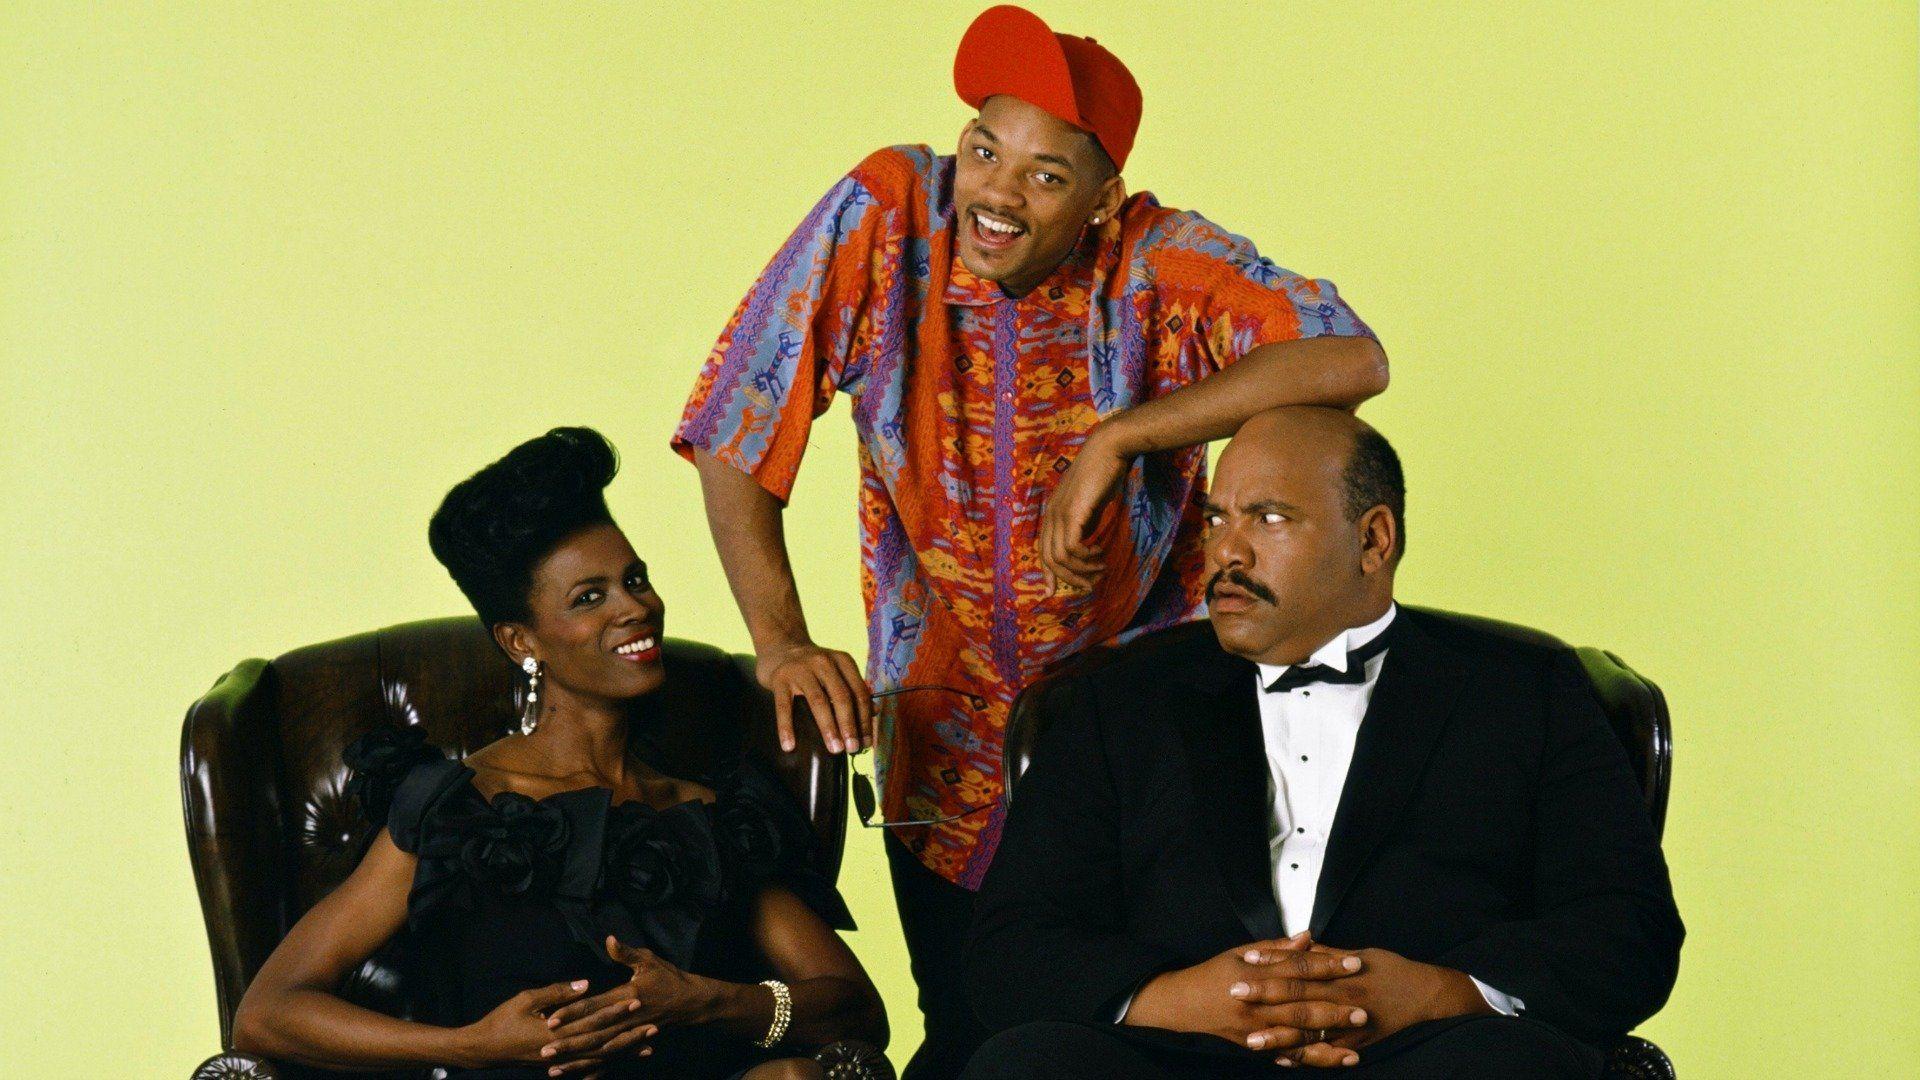 Fresh Prince Of Bel Air Comedy Sitcom Series Television Will Smith